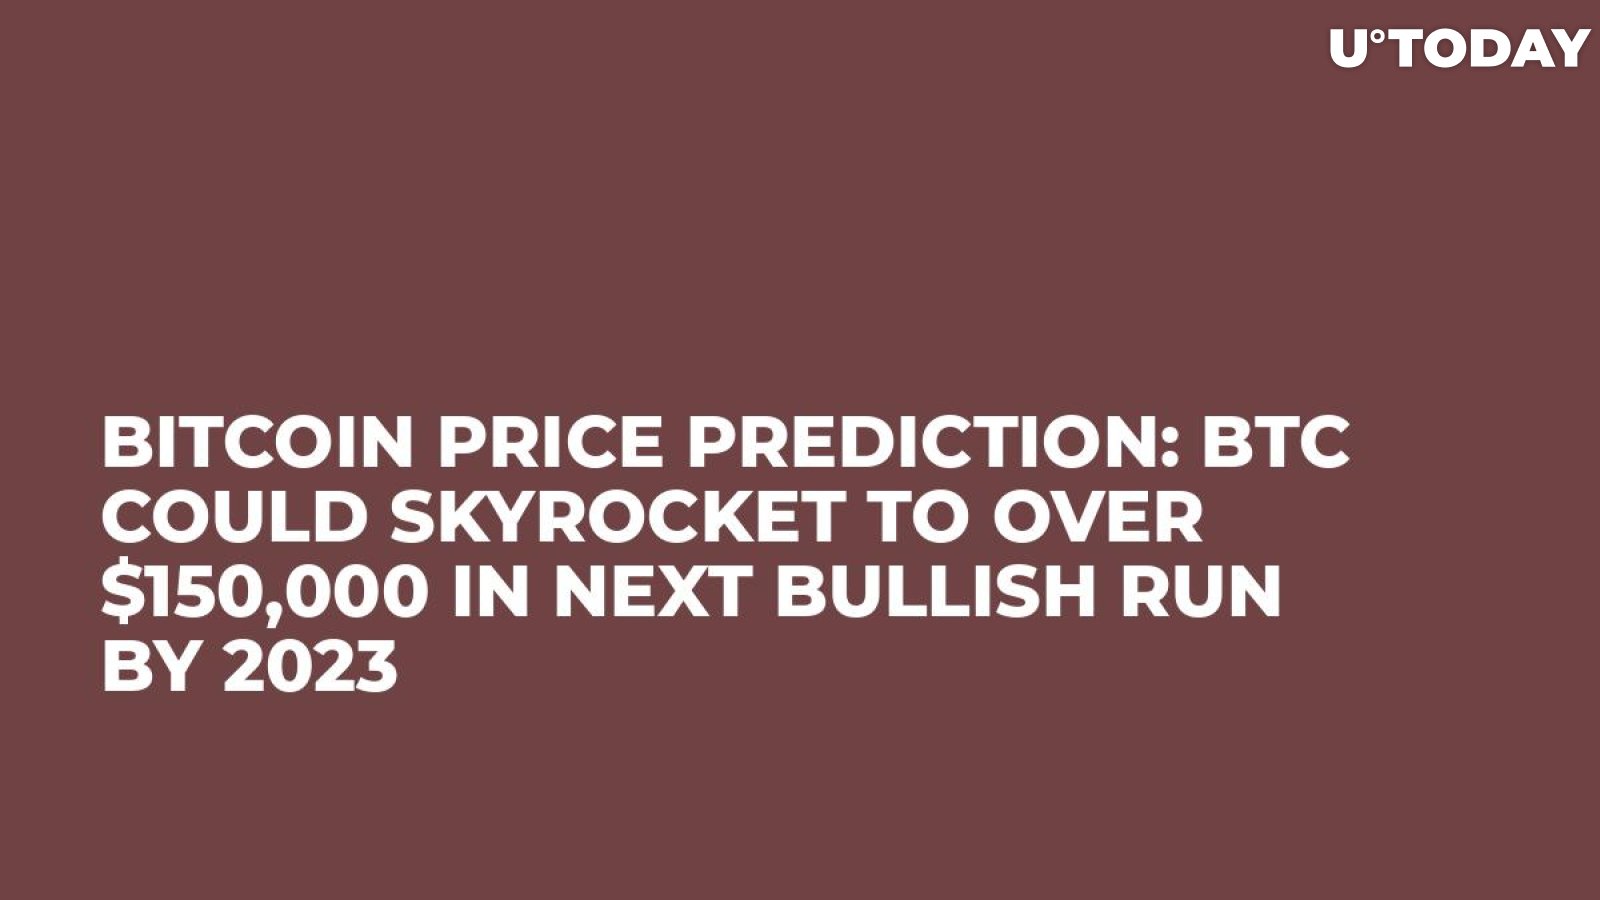 Bitcoin Price Prediction: BTC Could Skyrocket to over $150,000 in Next Bullish Run by 2023